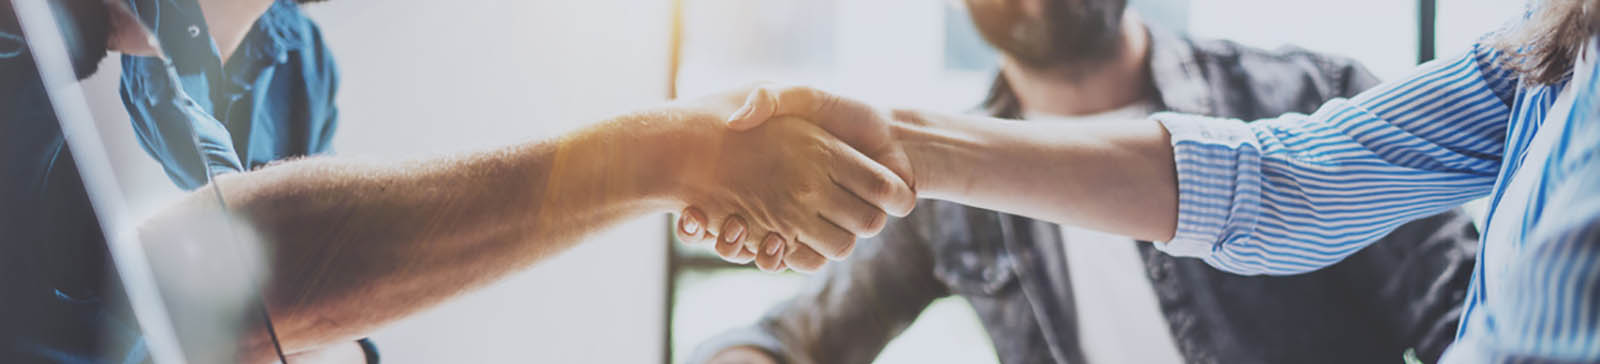 Business partnership handshake concept.Photo two coworkers handshaking process.Successful deal after great meeting.Horizontal, blurred background.Wide.